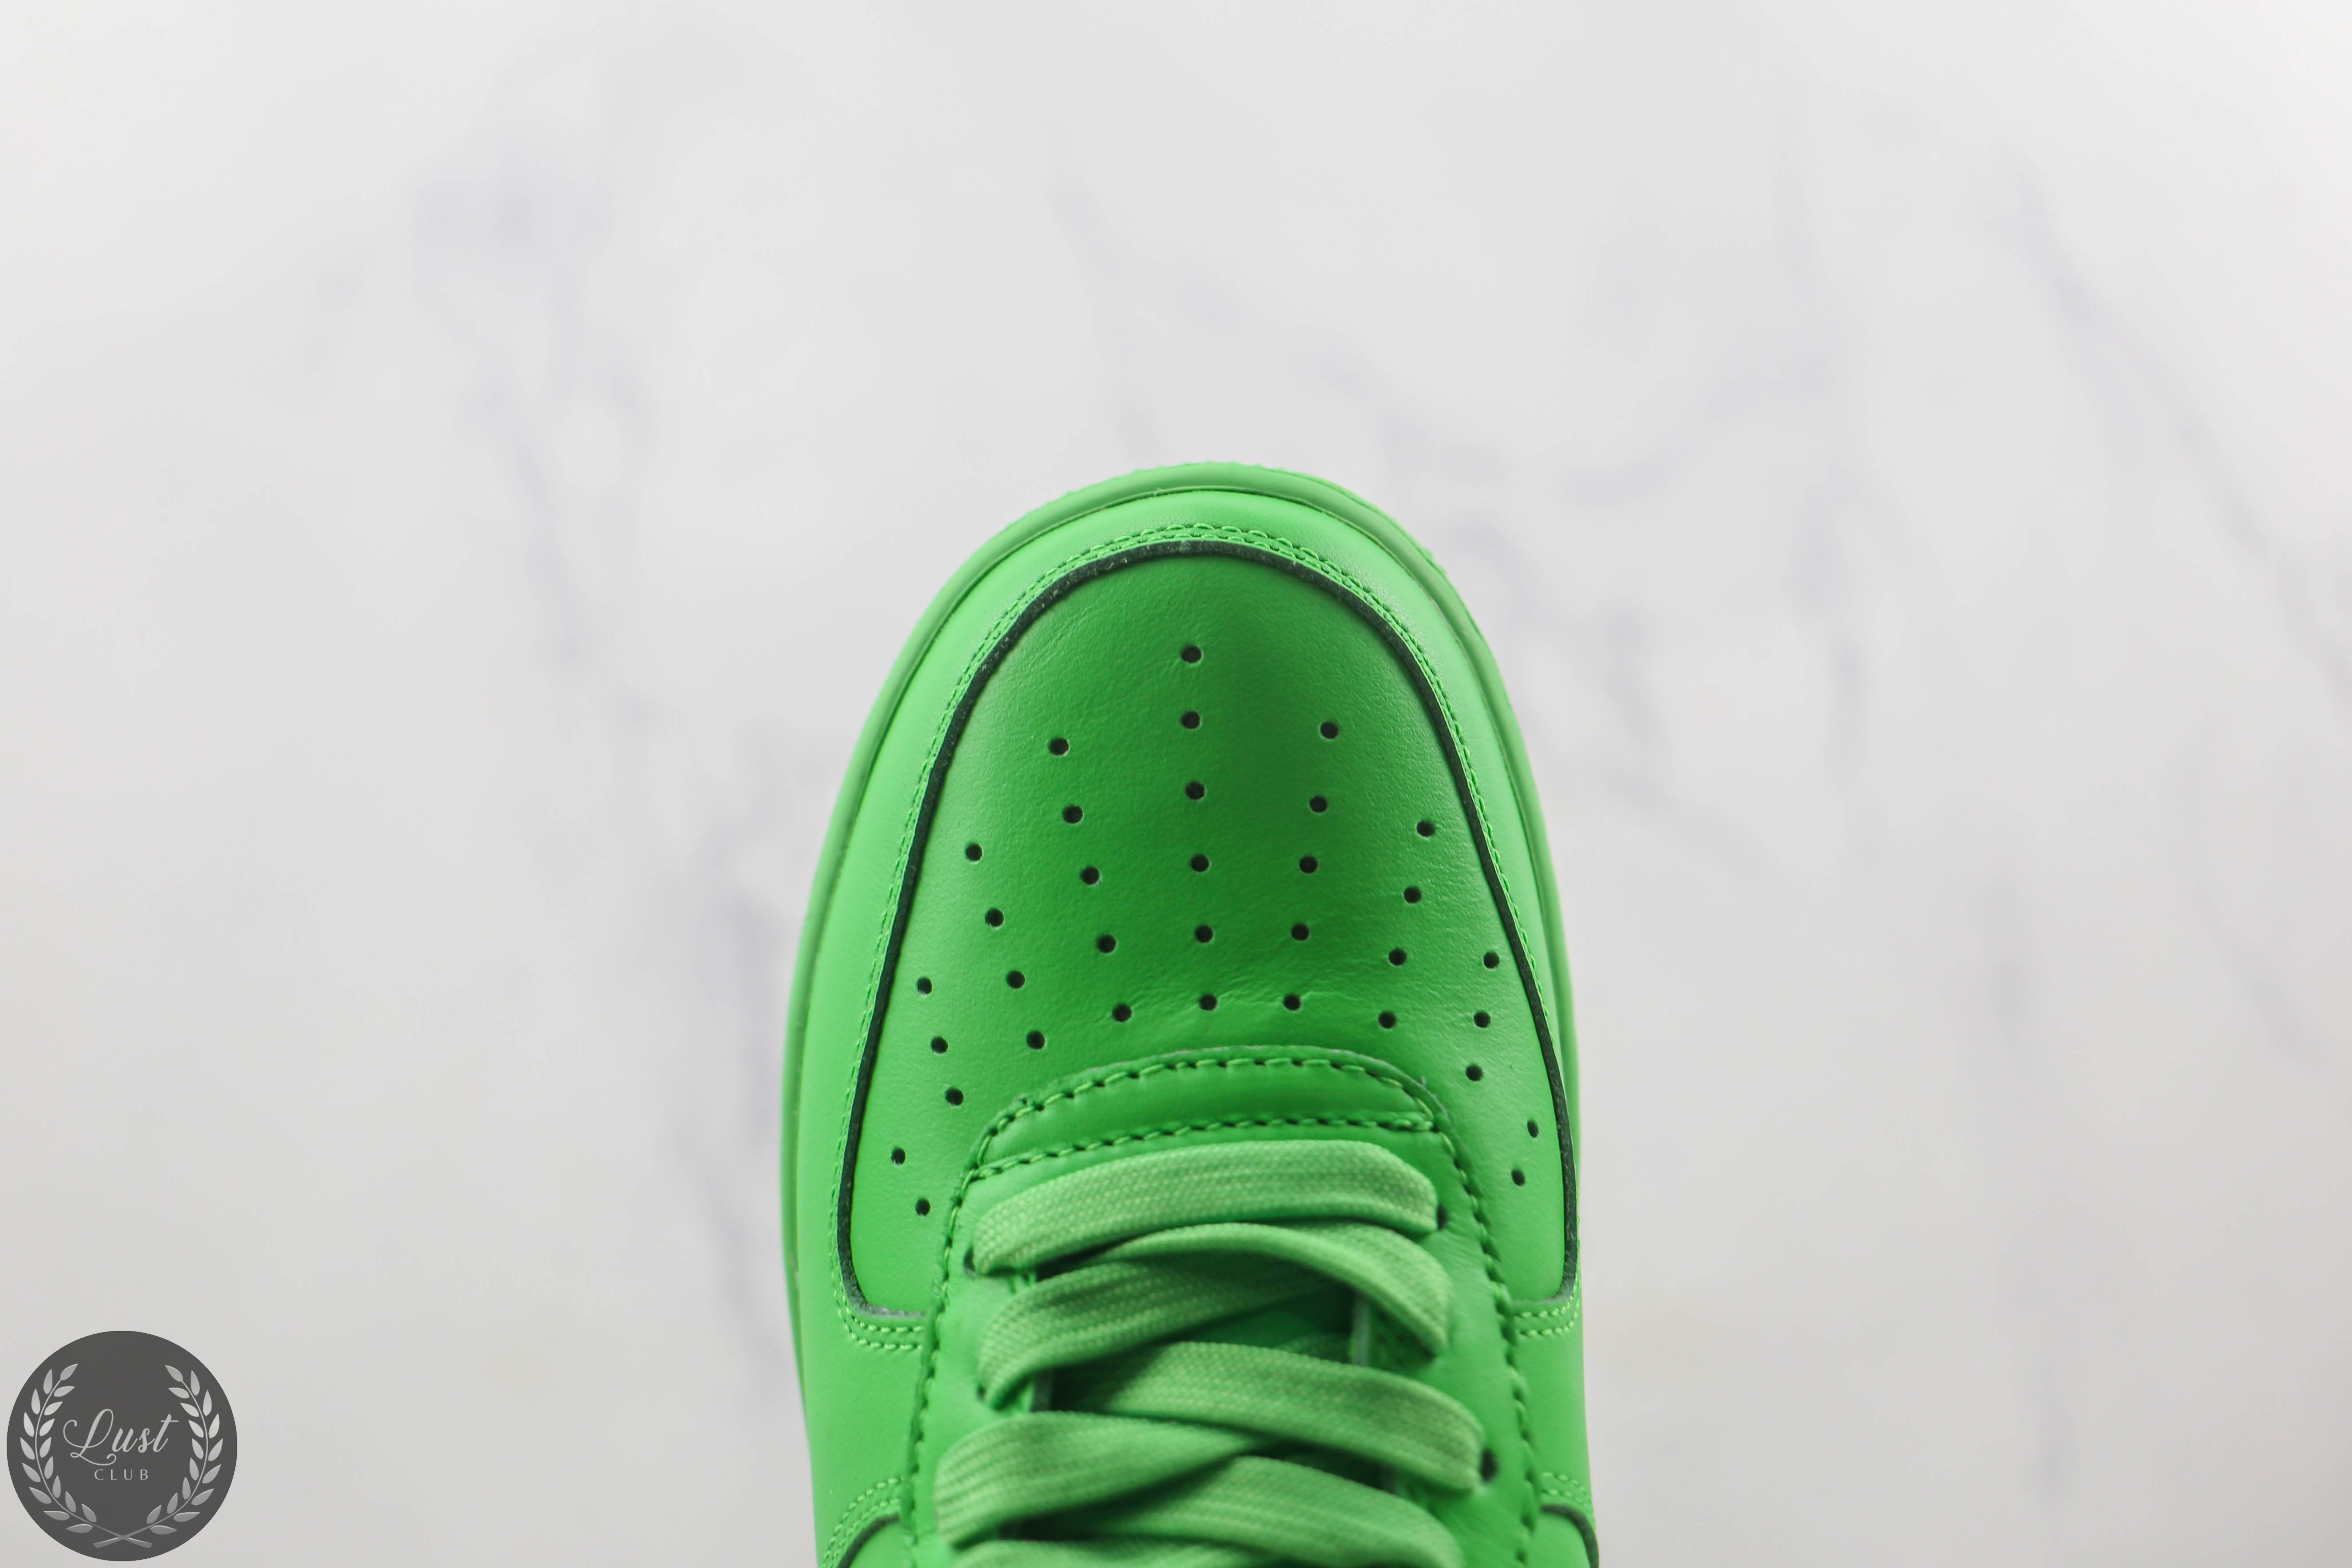 Nike Air force 1 Low Off White Light Green Spark